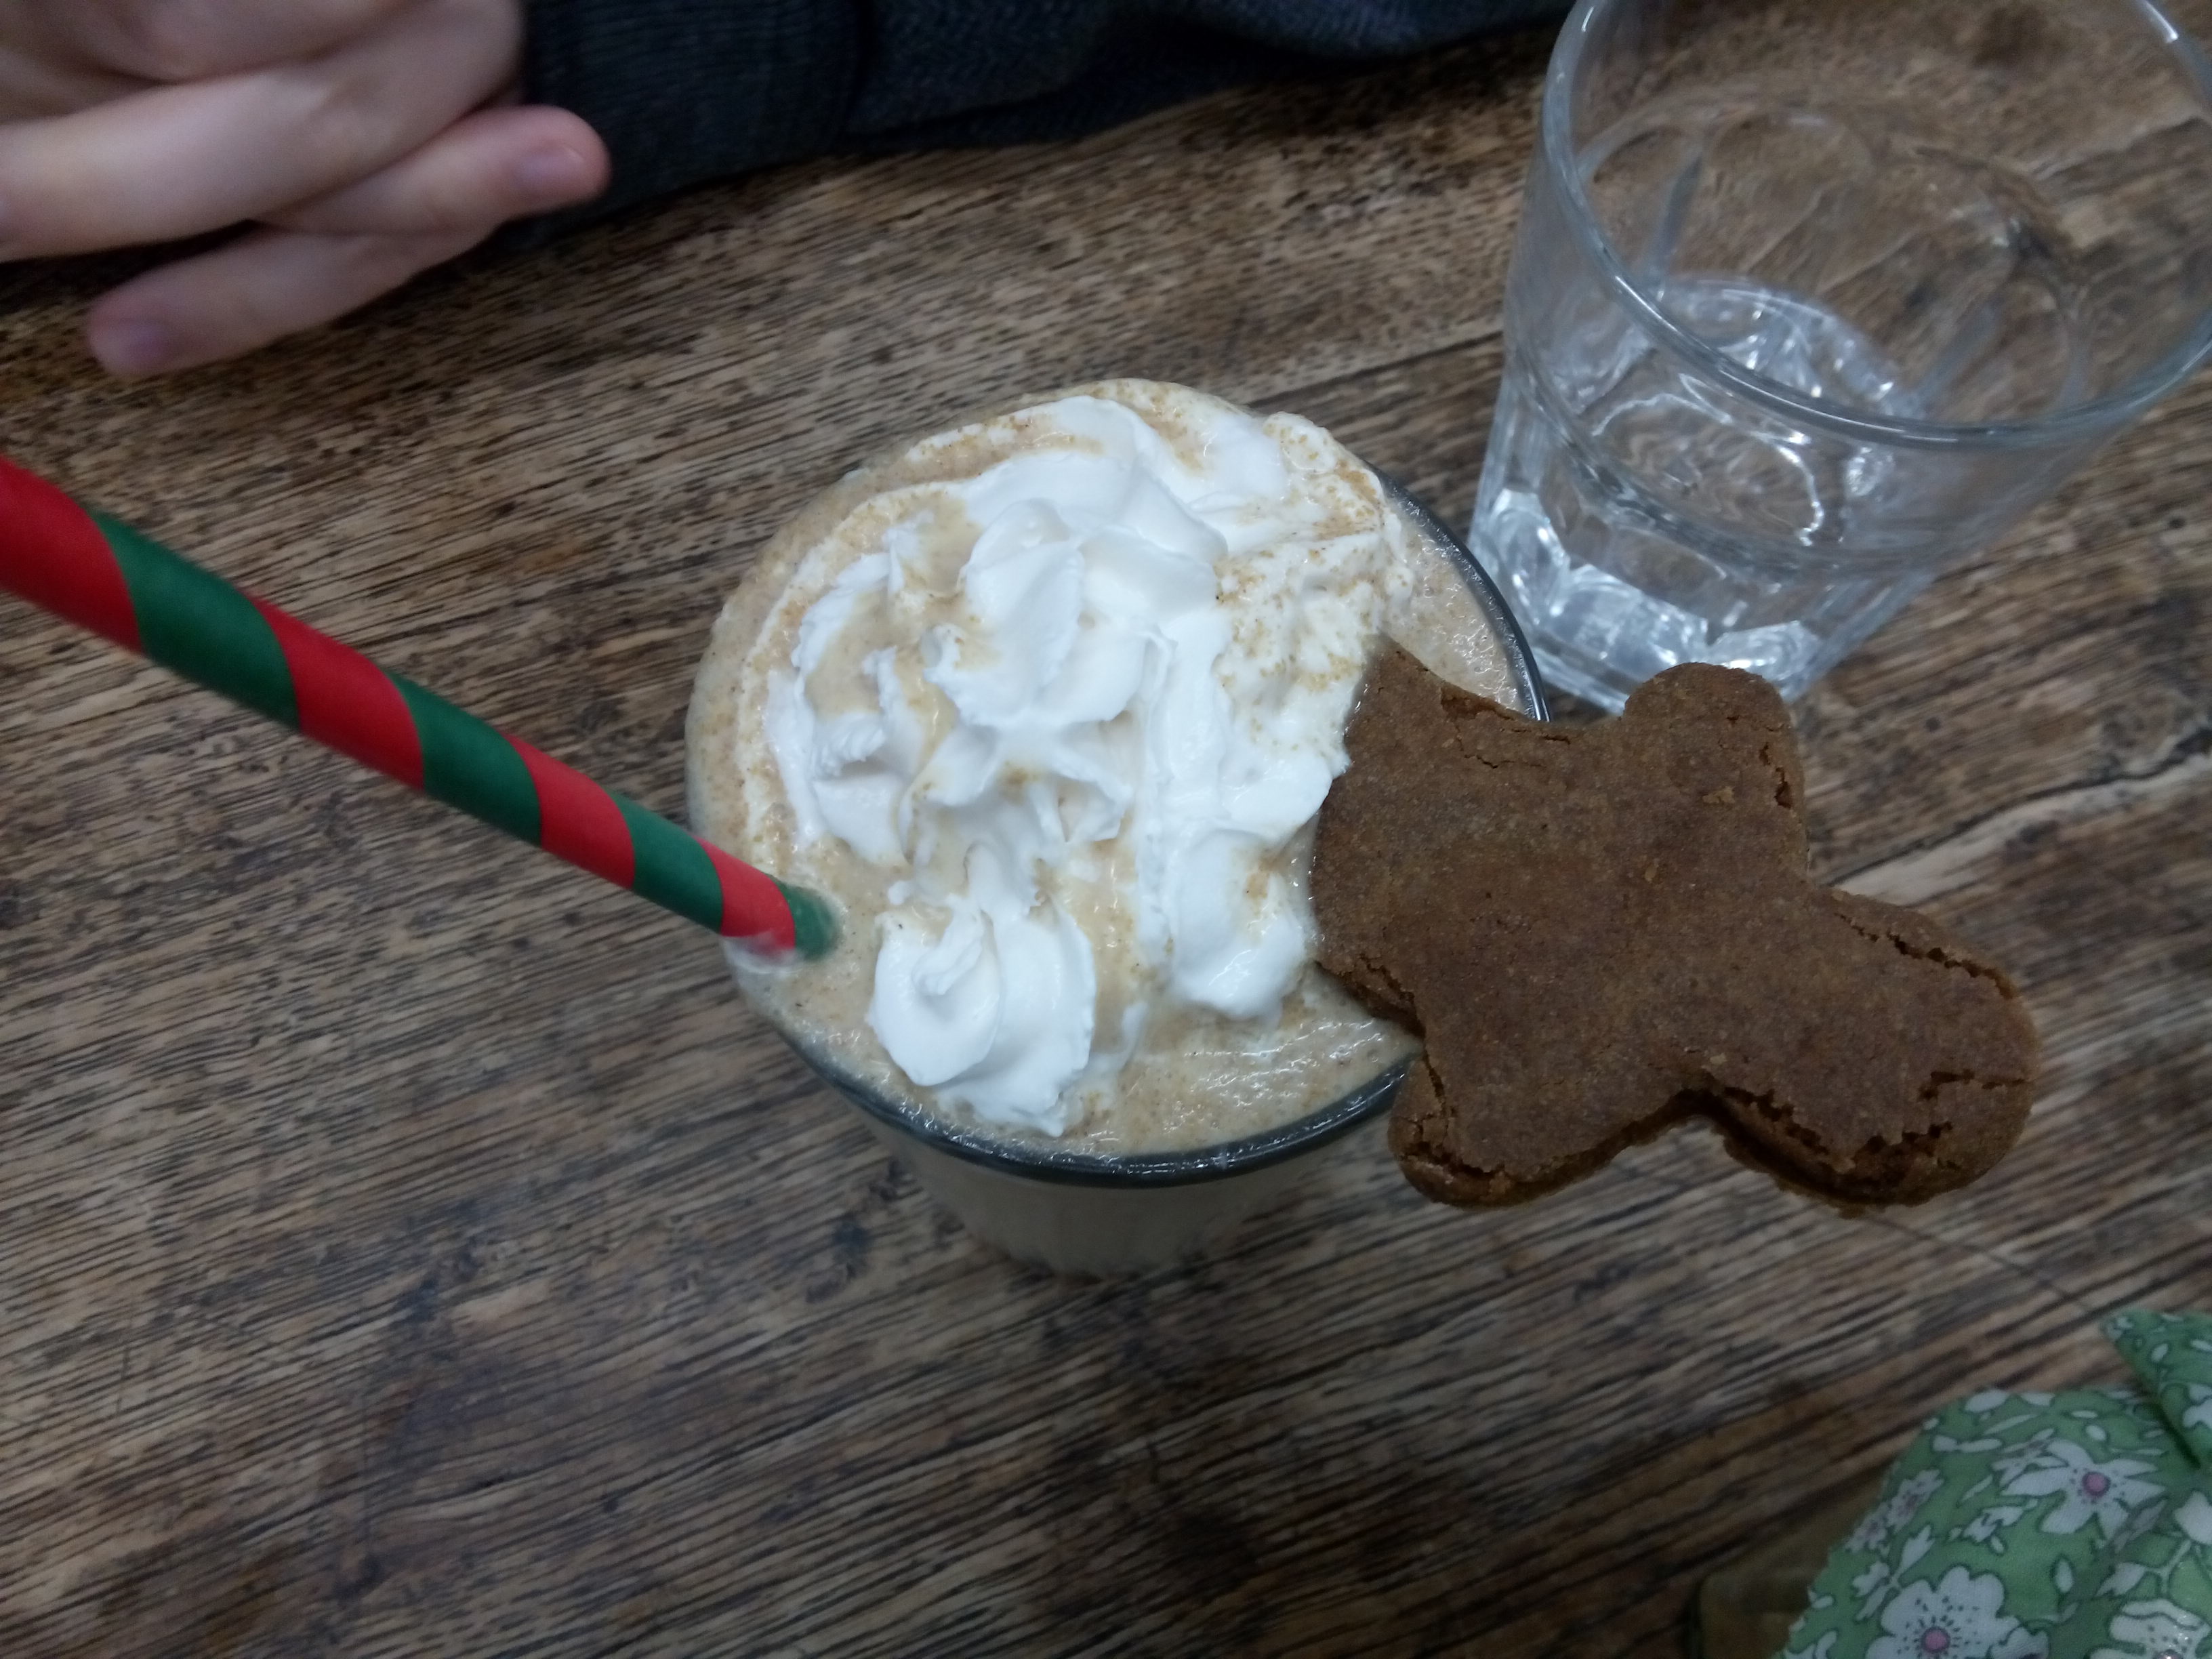 A milkshake with a swirl of cream on top, a red and green straw, and a gingerbread man